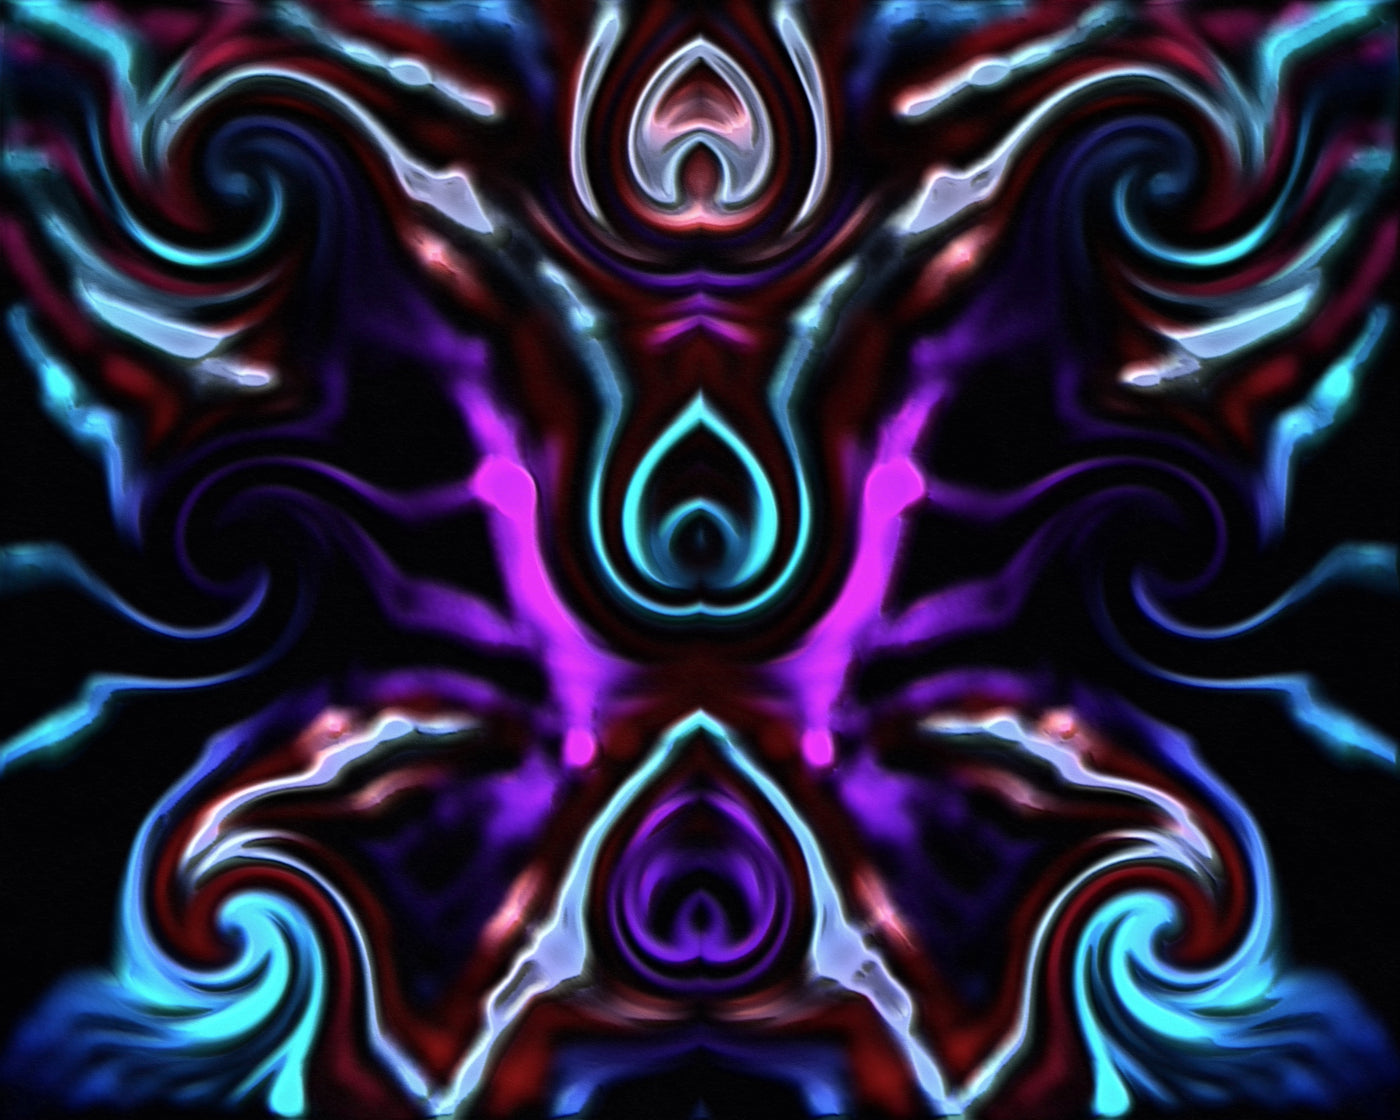 The auras shocking reflection - Mark Humes Gallery Of Abstract Art